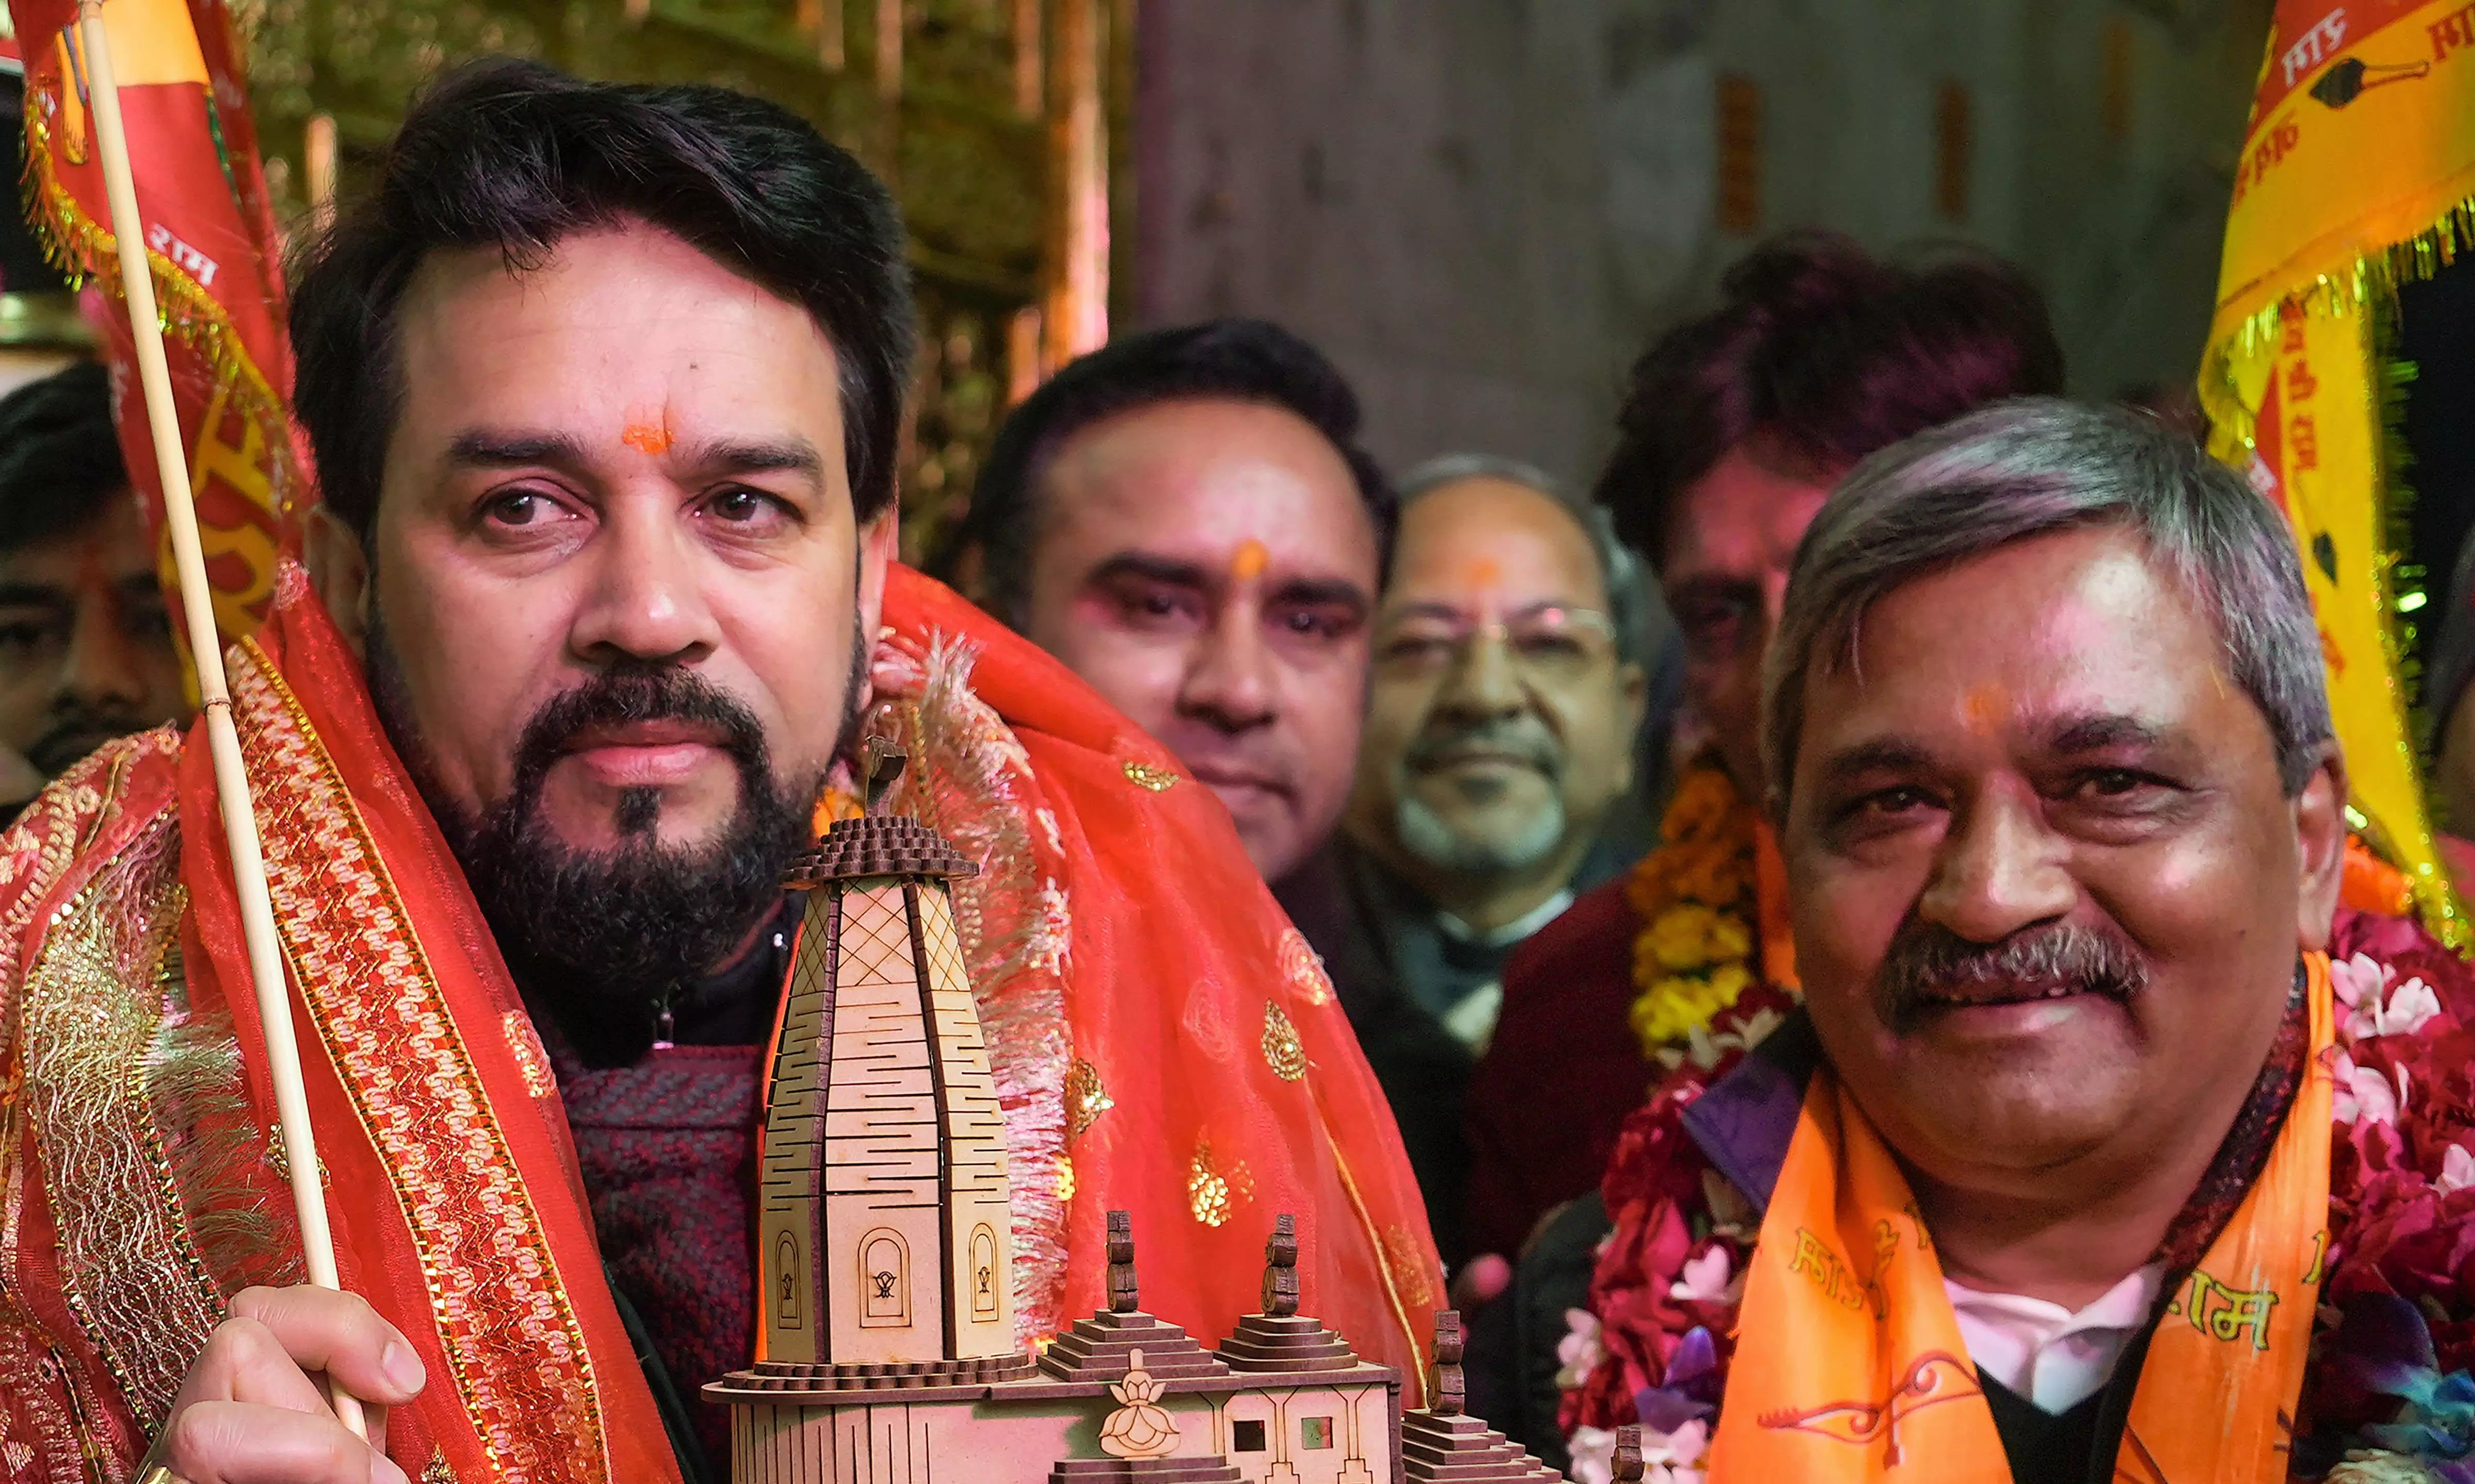 Ram temple built after 500-year wait, oppn should refrain from commenting: Anurag Thakur